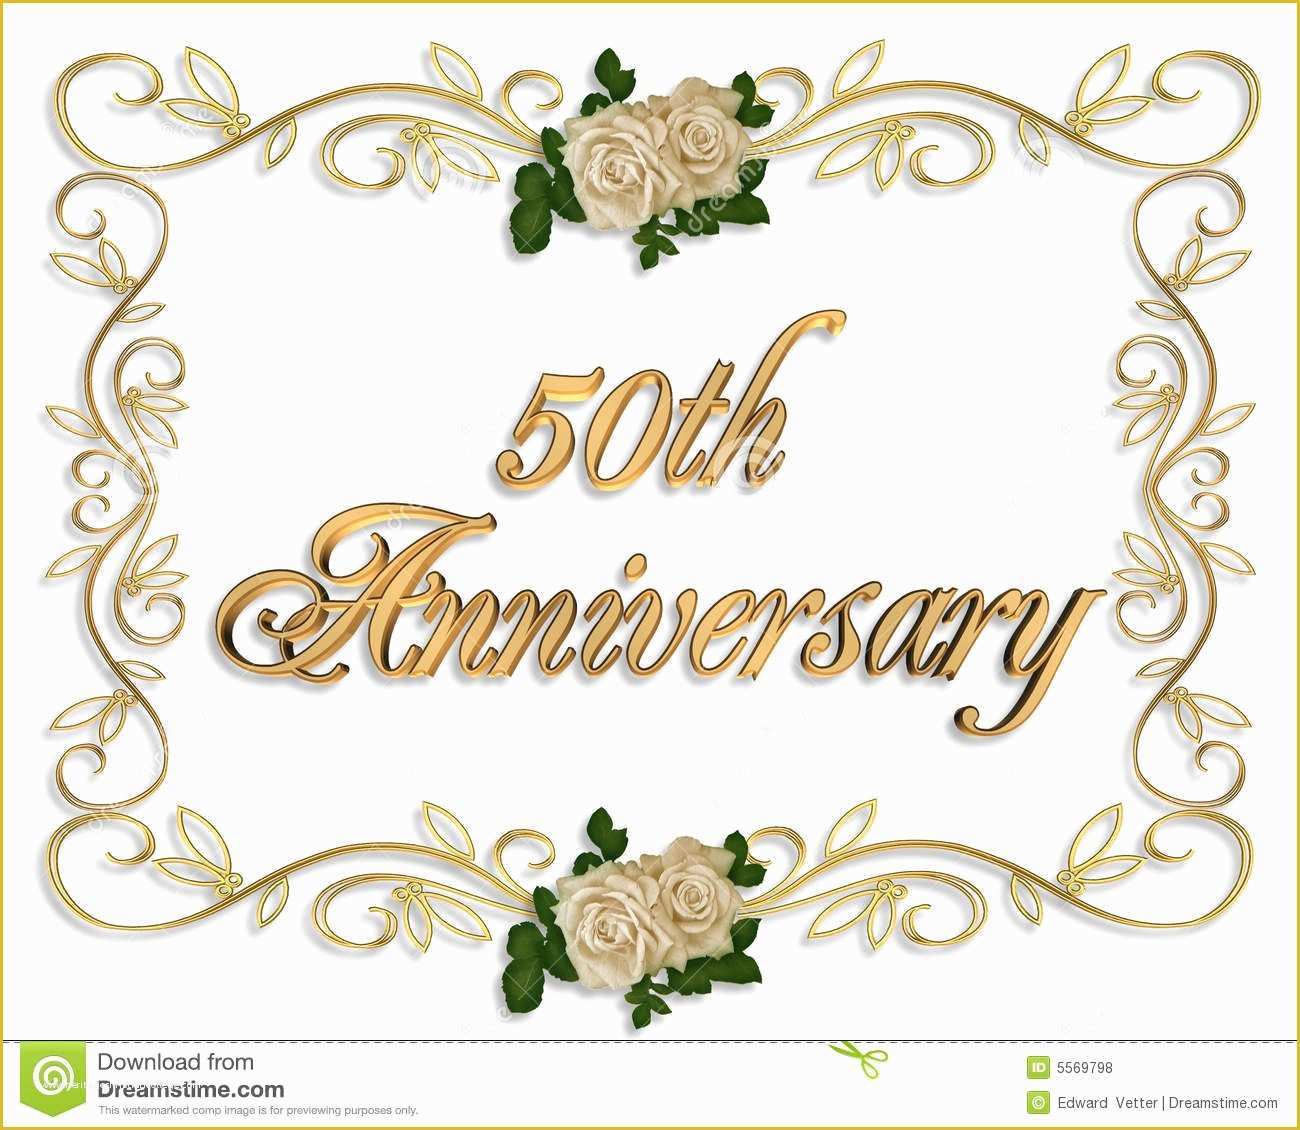 50th Anniversary Templates Free Of 50th Anniversary Invitation Backgrounds